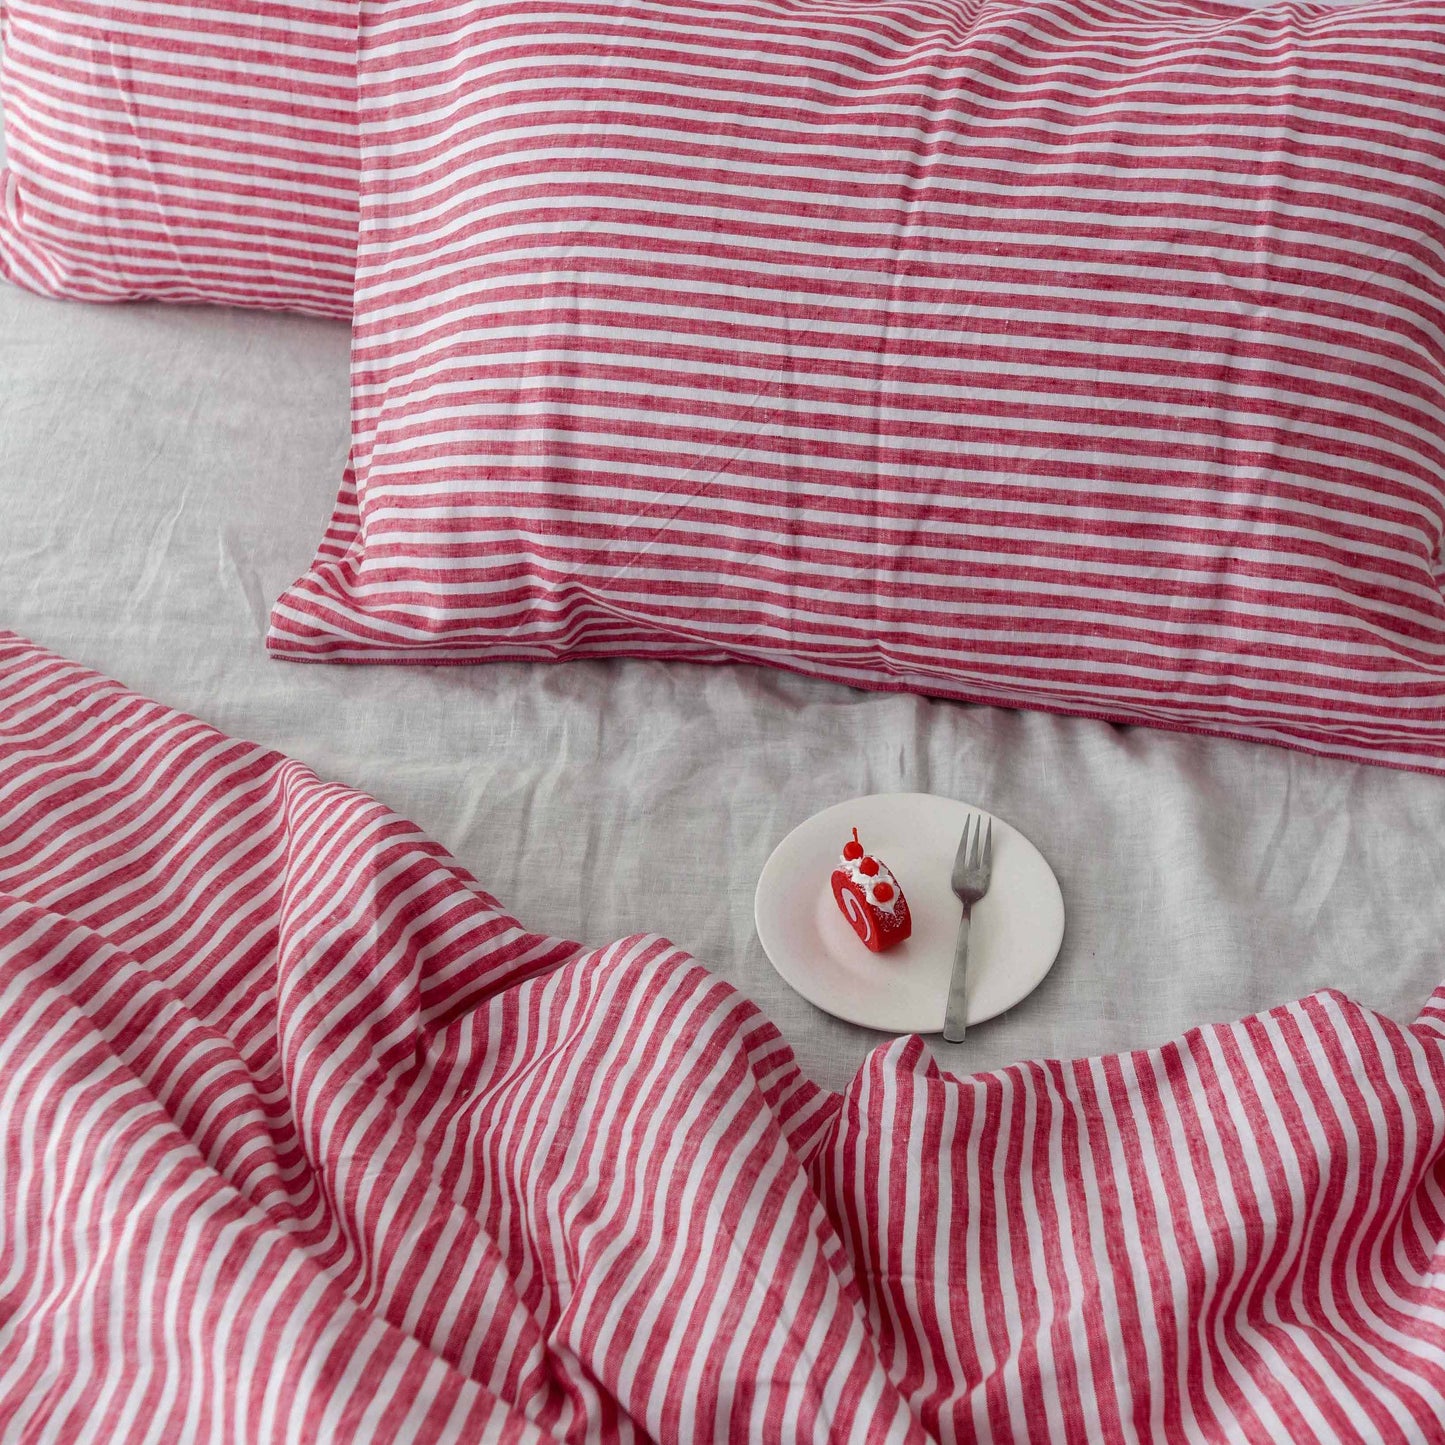 Red Striped French Linen Duvet Cover+2 Pillowcases Set - Yarn Dyeing 52